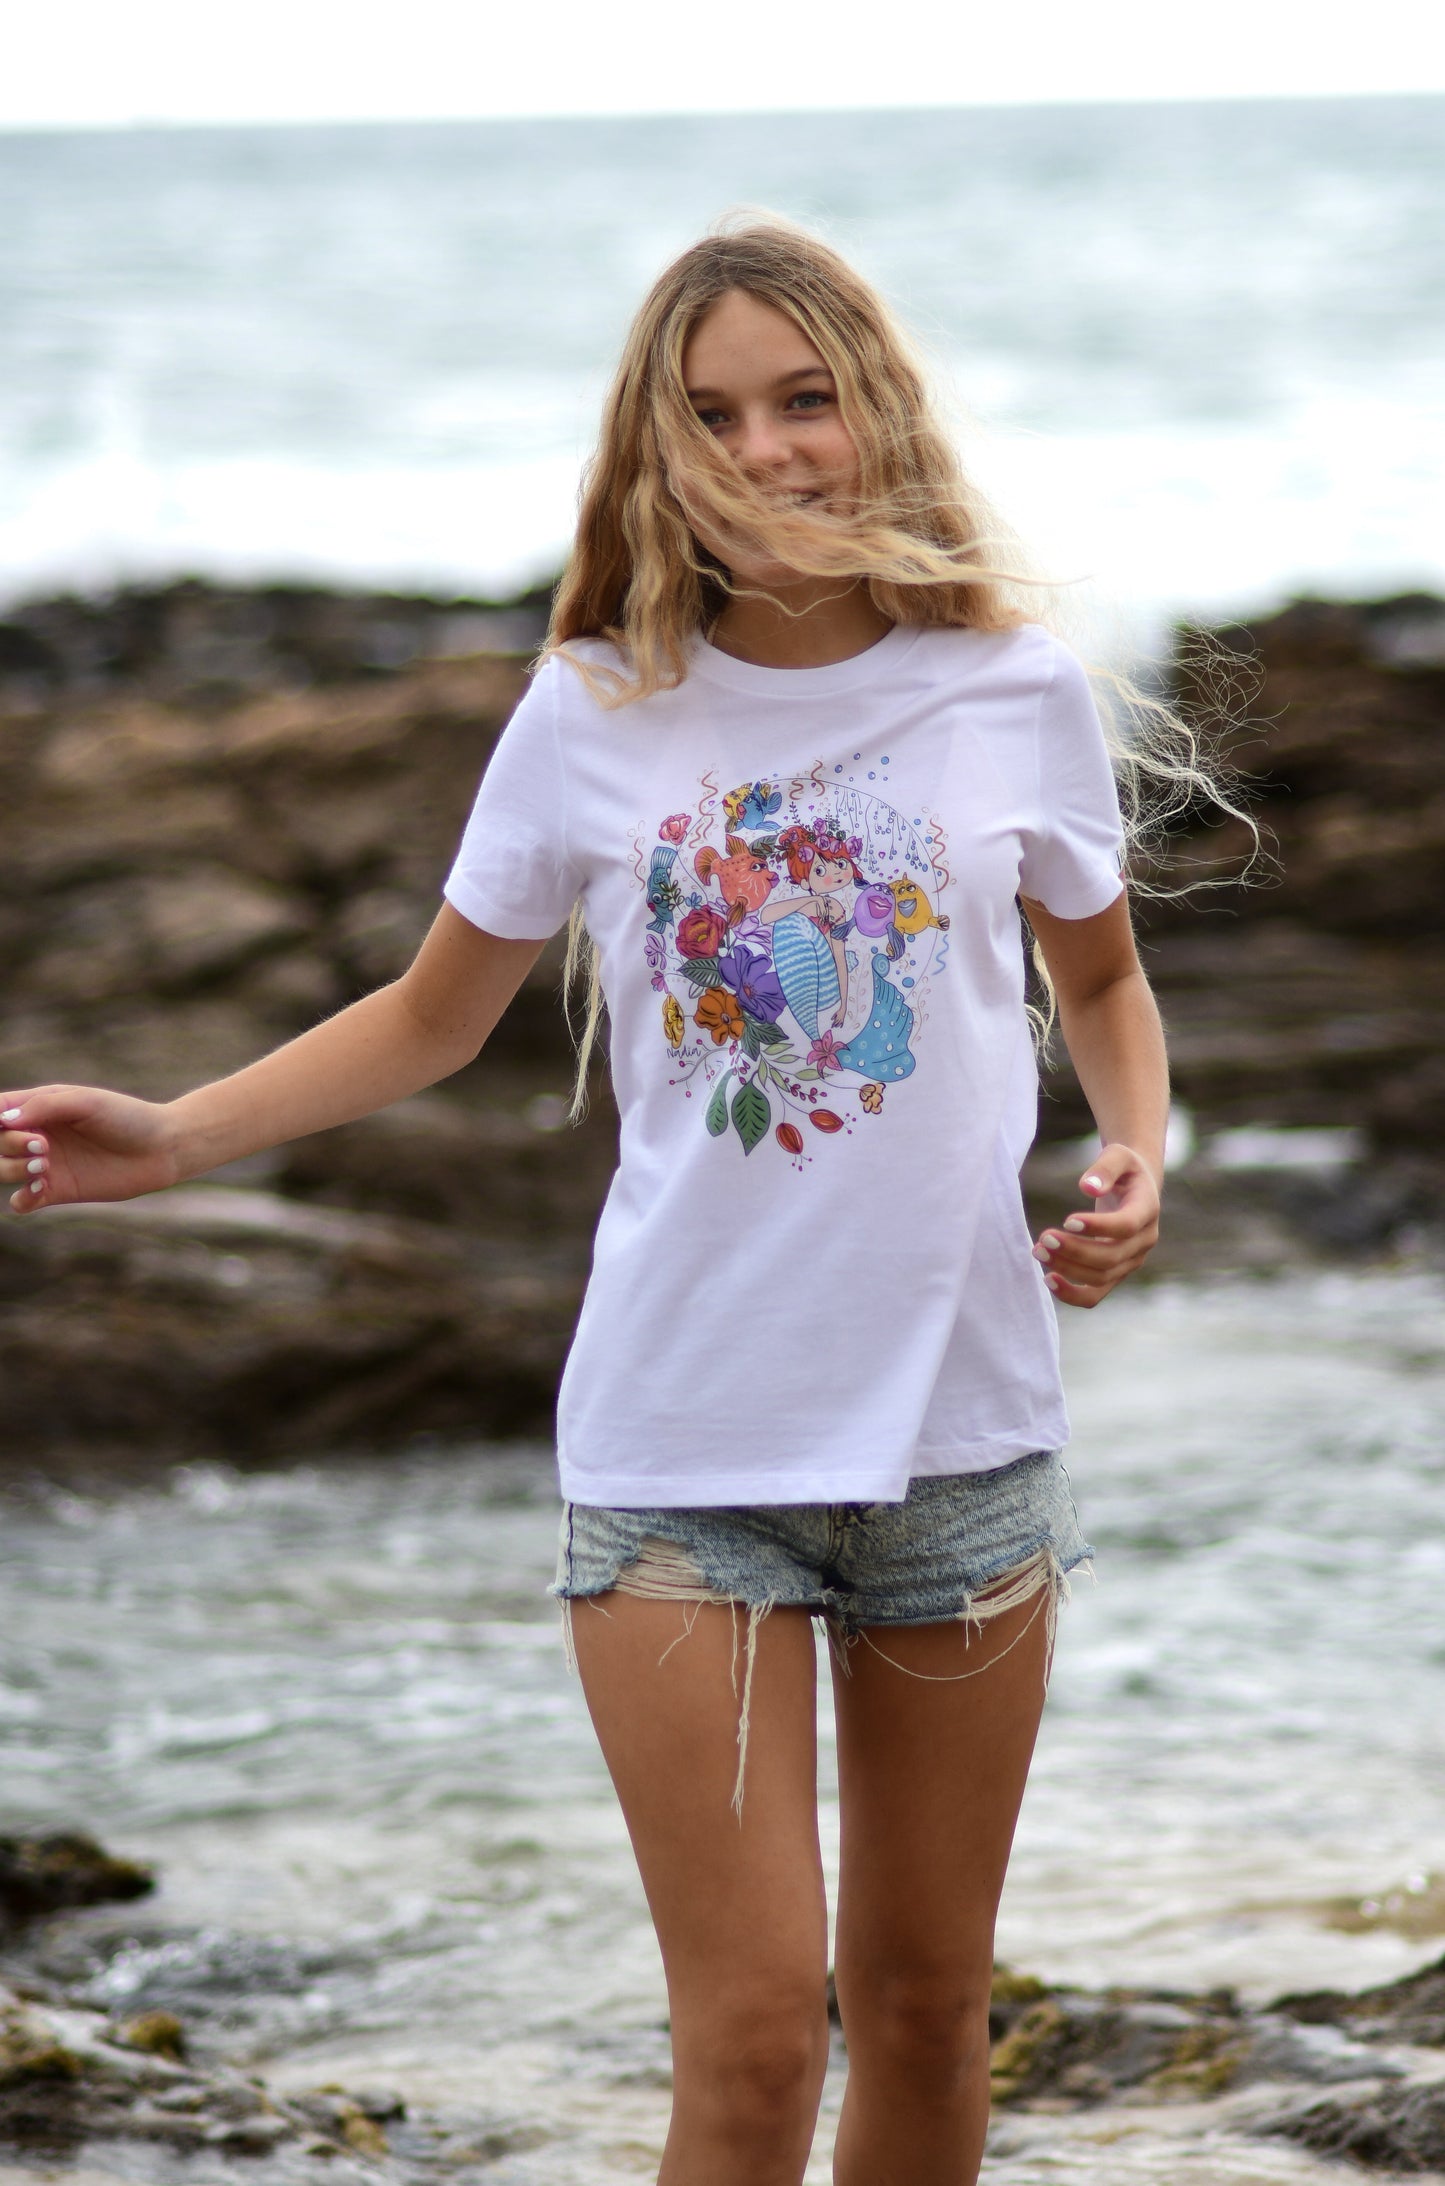 Red headed mermaid fish and floral graphic design beach surf t-shirt for women. Wearable art handmade by Nadia Watts. North Shore Girls graphic tee collection. Hand-drawn illustrated clothing for the beach lifestyle